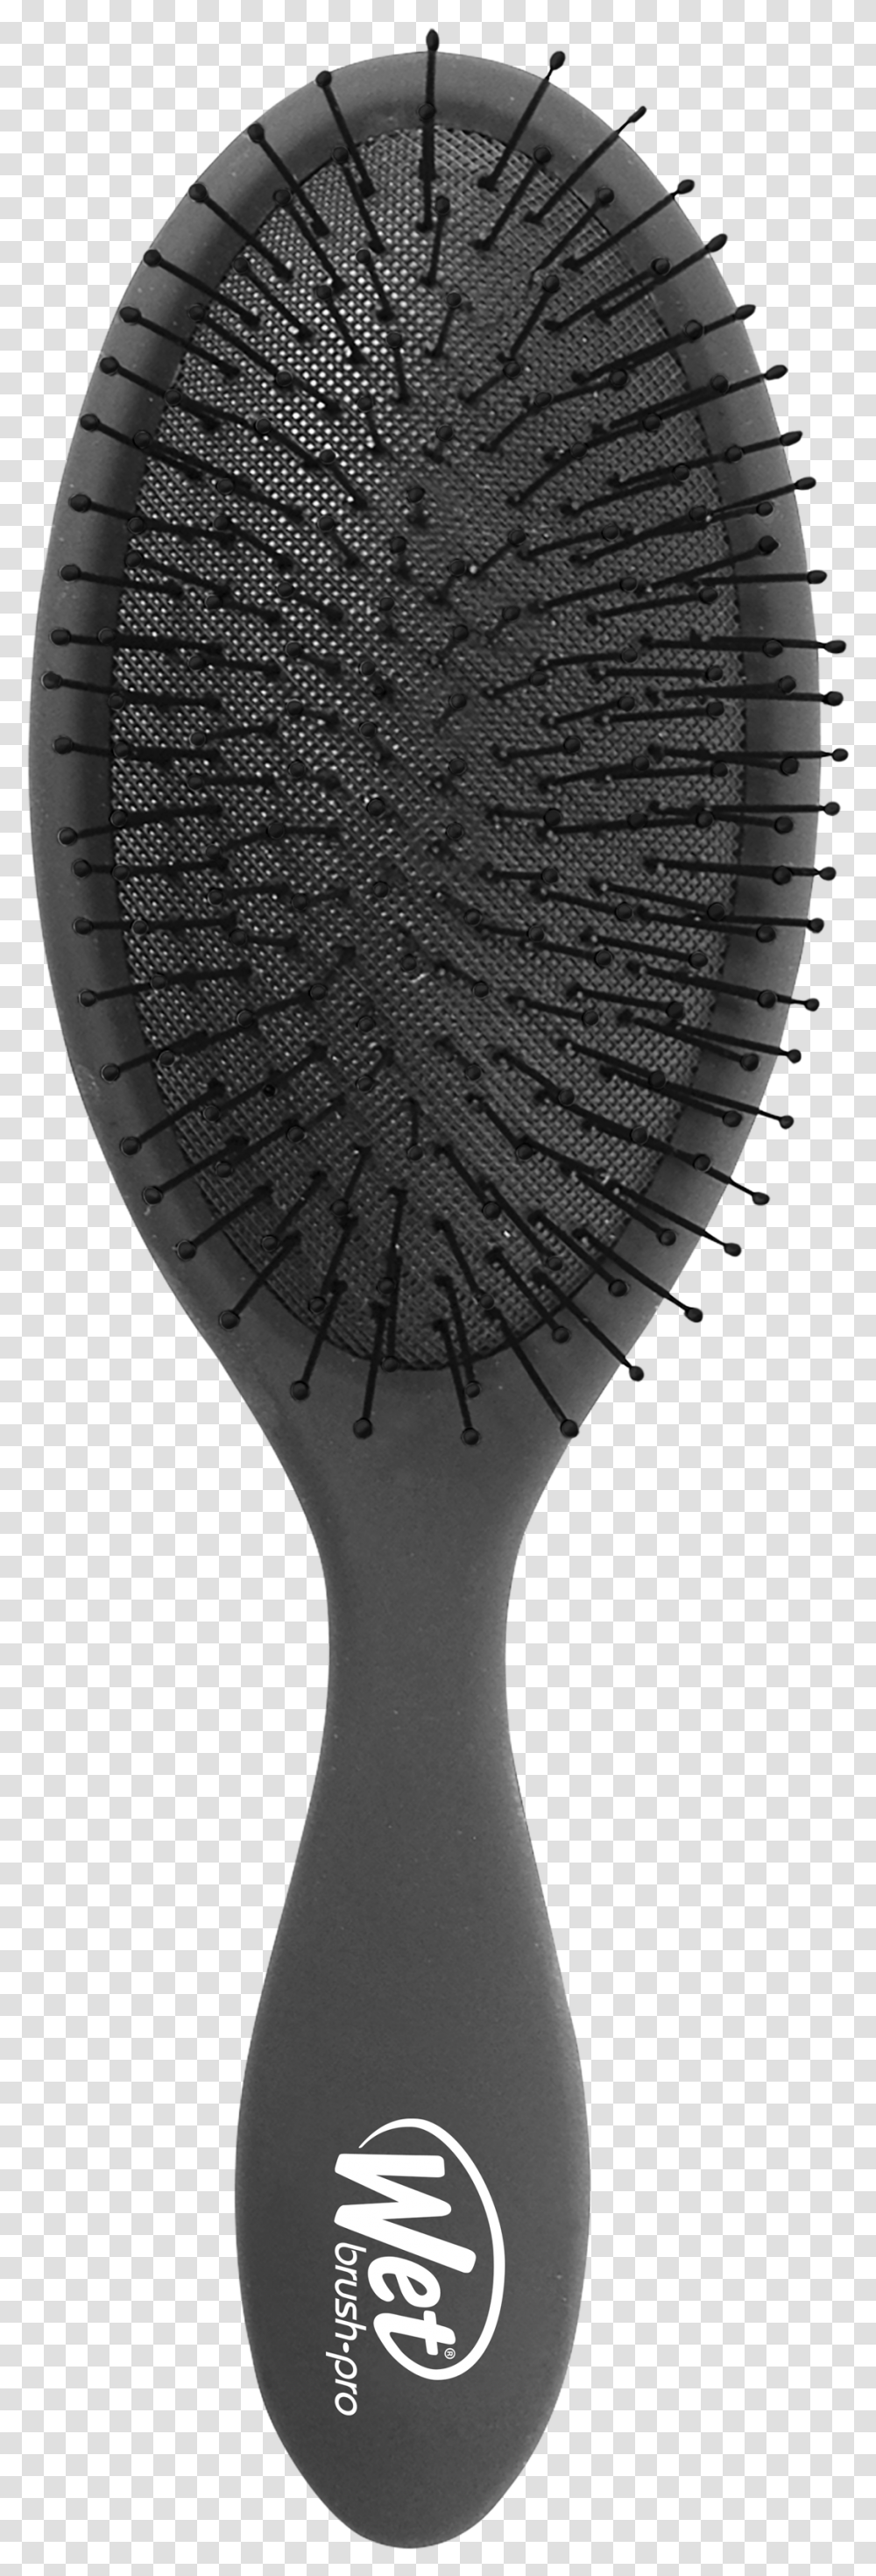 Hairbrush Wet And Dry Hair Brushes, Armor, Tool Transparent Png